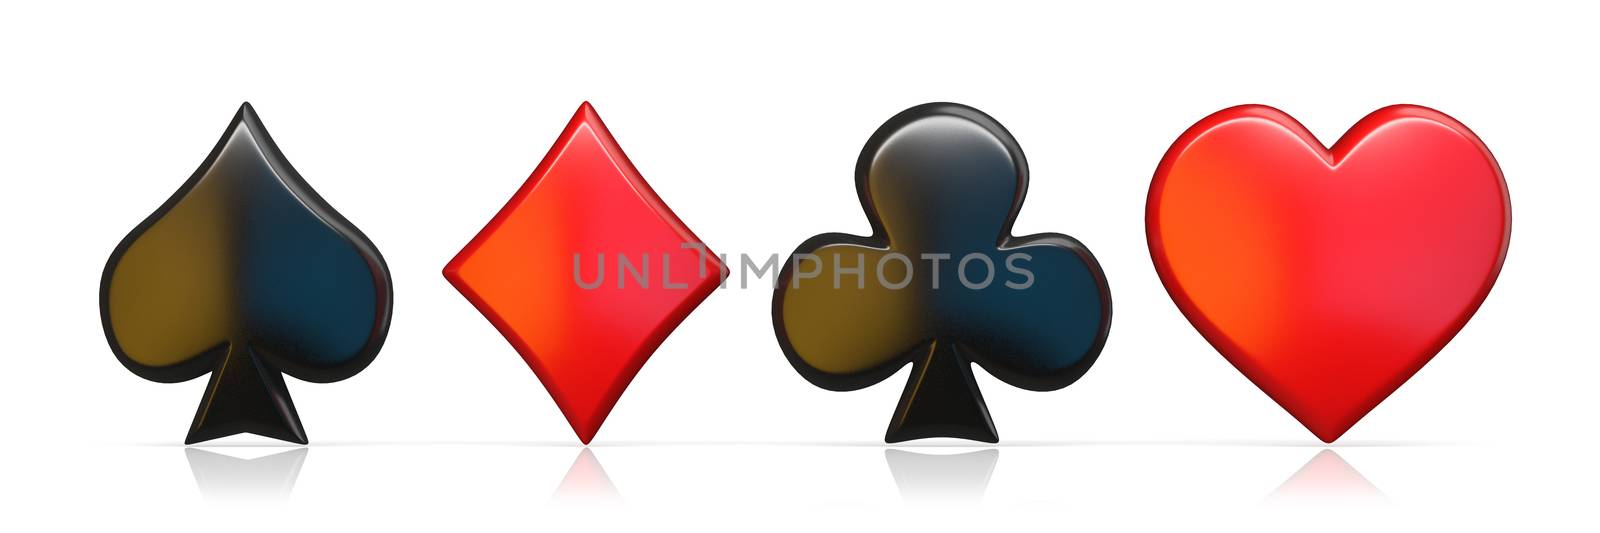 Spade, heart, diamond and club sign 3D render illustration isolated on white background